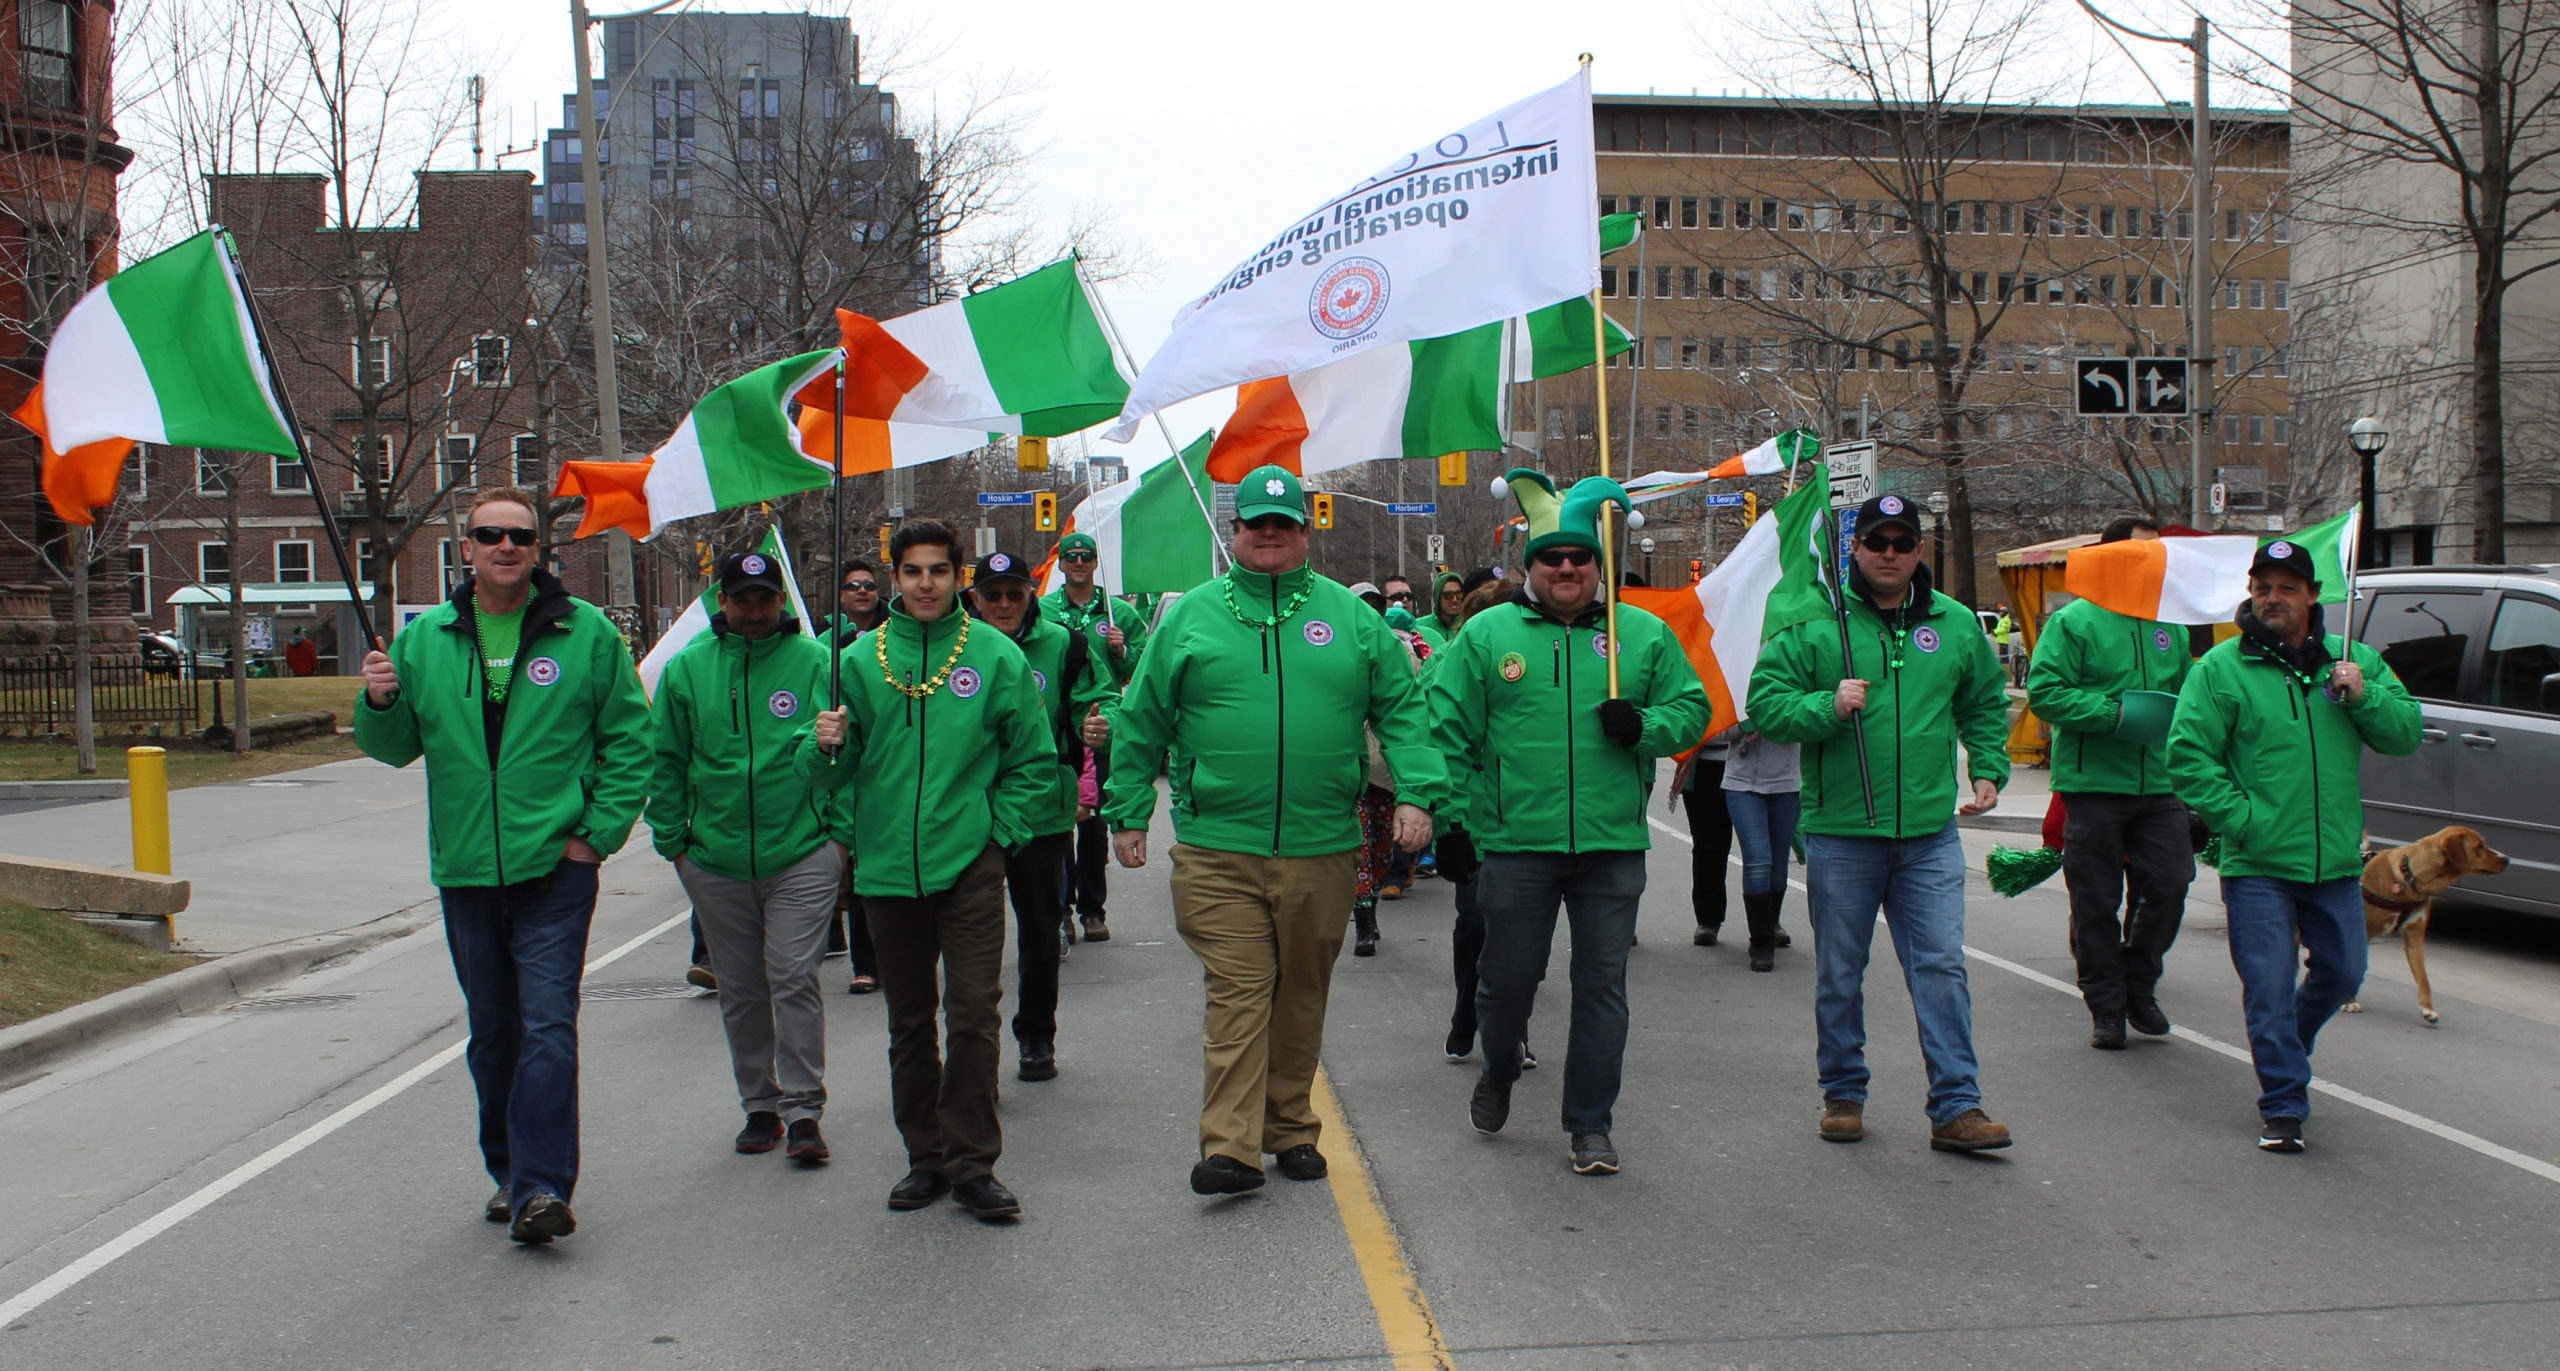 Business Manager Mike Gallagher leads the Local 793 contingent.